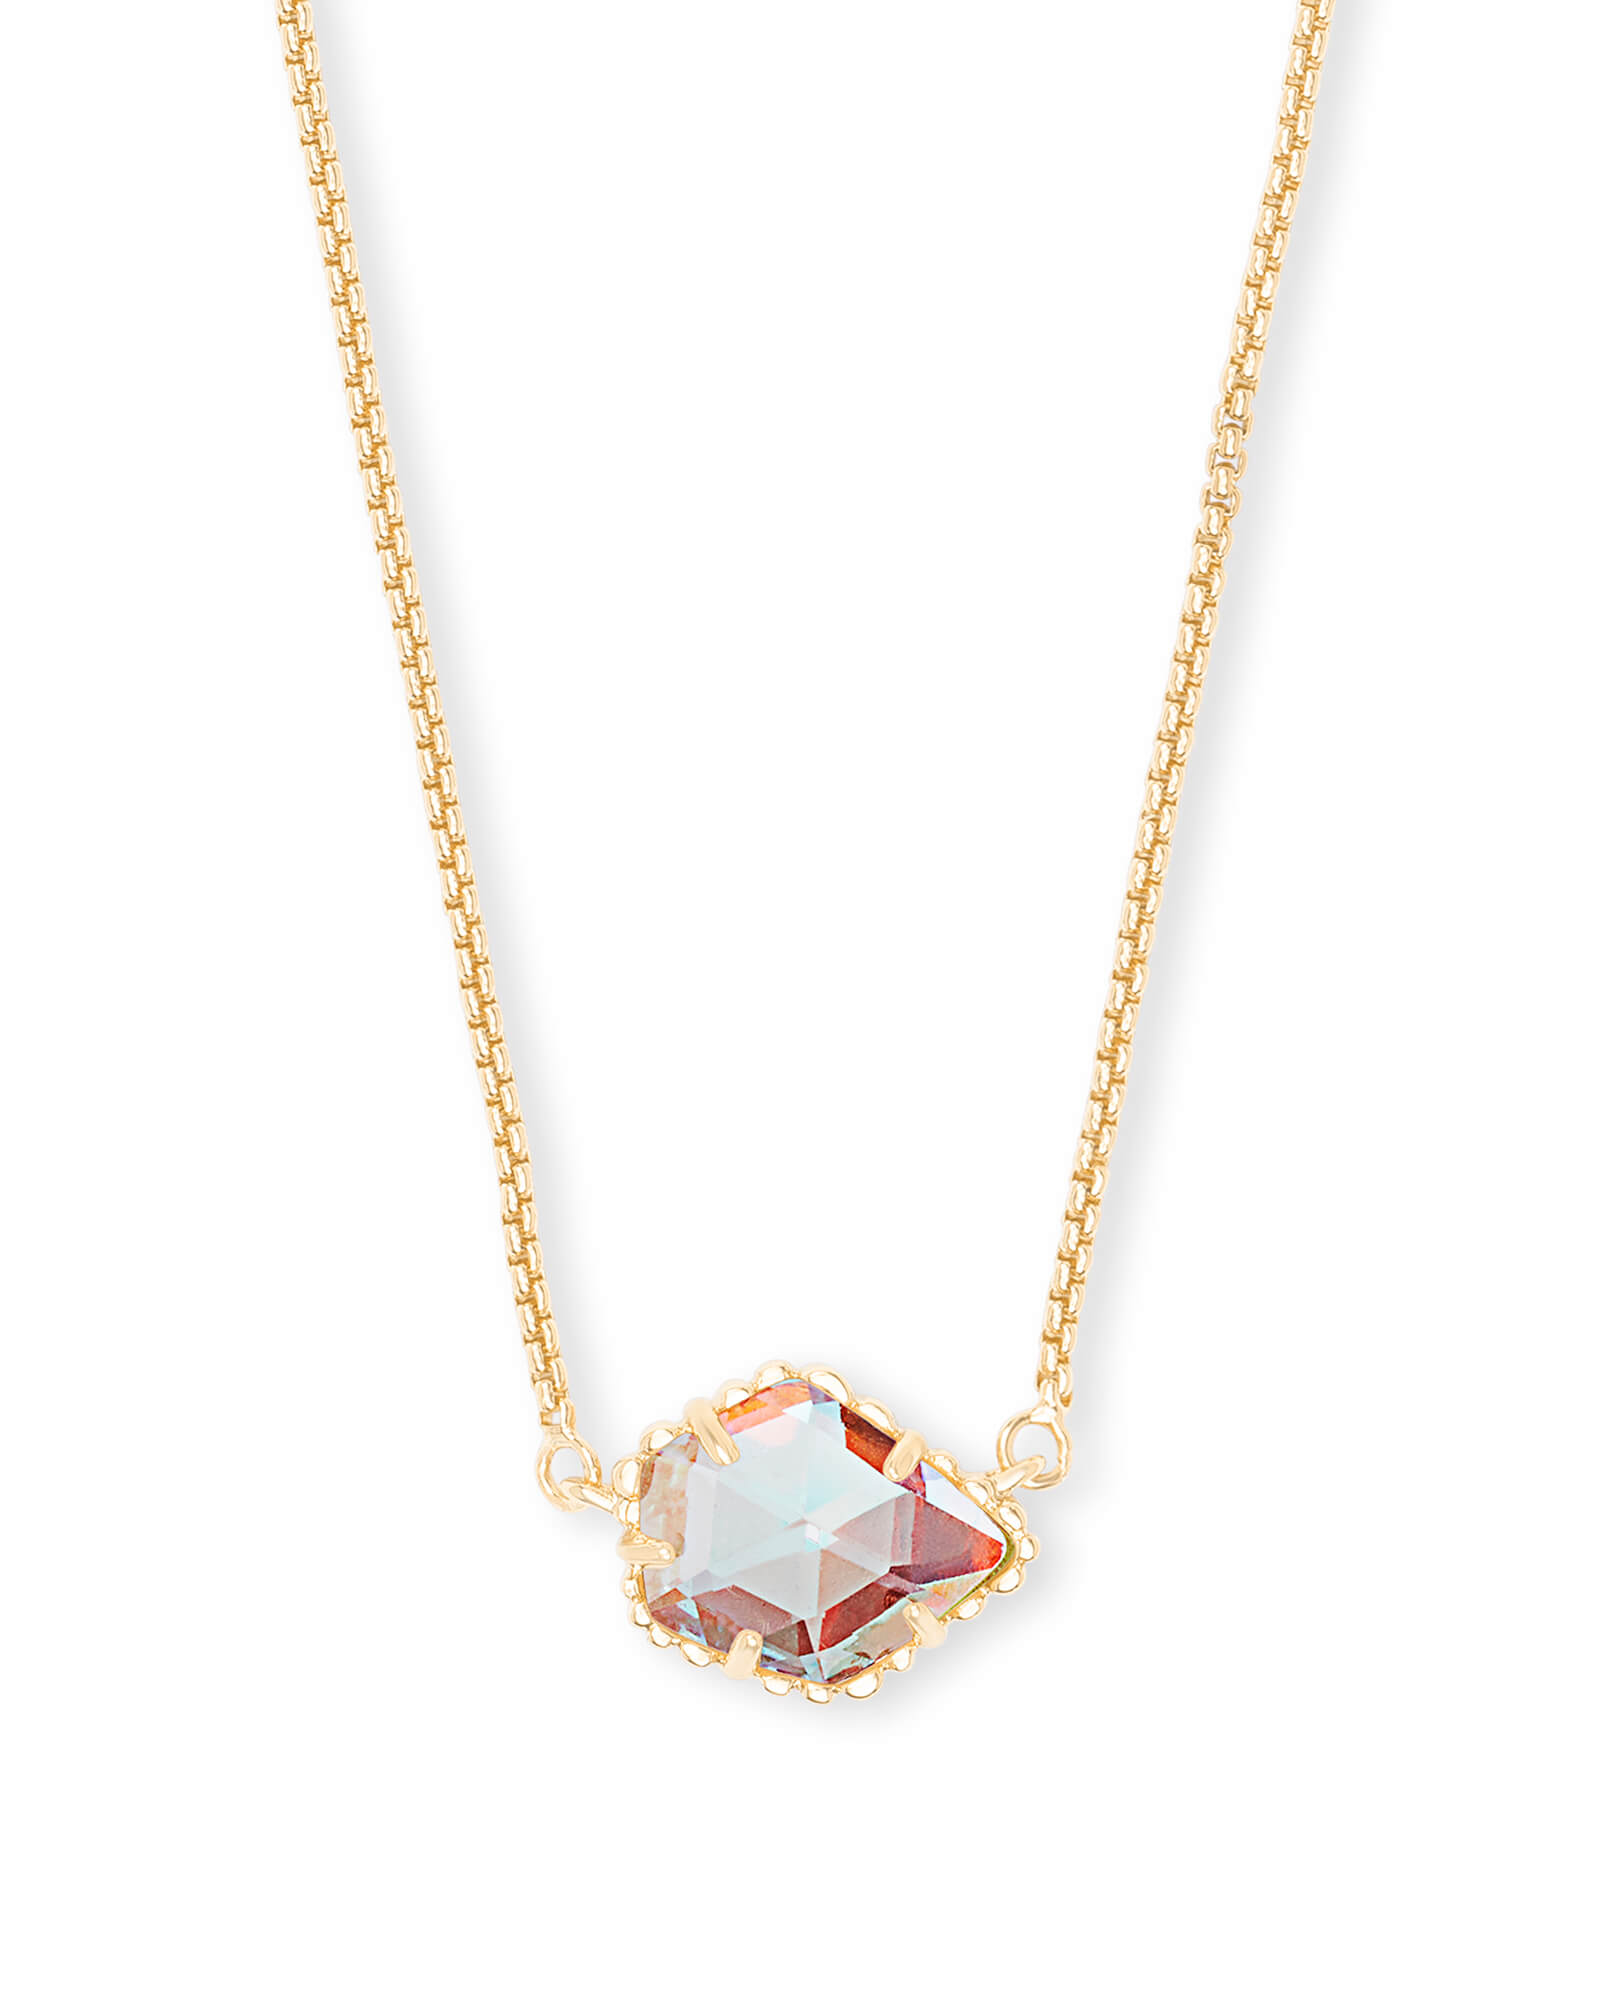 Tess Gold Pendant Necklace in Dichroic Glass | Kendra Scott